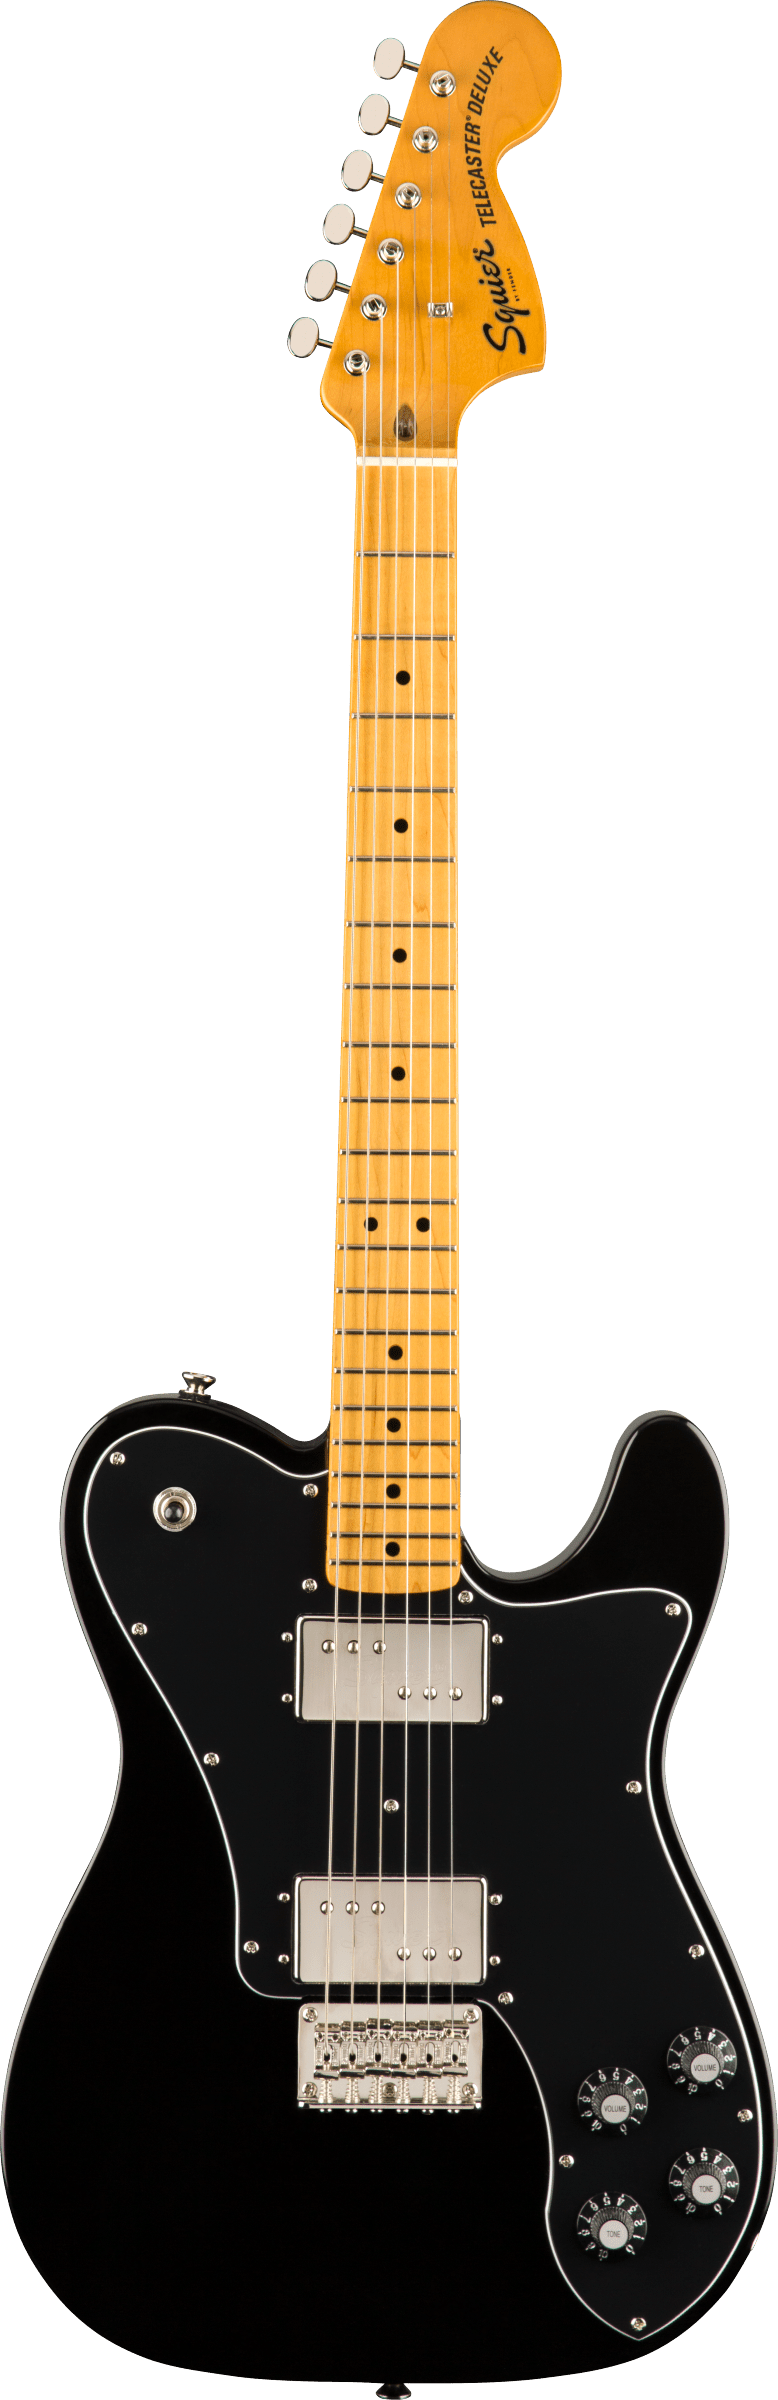 Squier Classic Vibe 60s Telecaster Deluxe Electric Guitar - Maple/ Black - Joondalup Music Centre